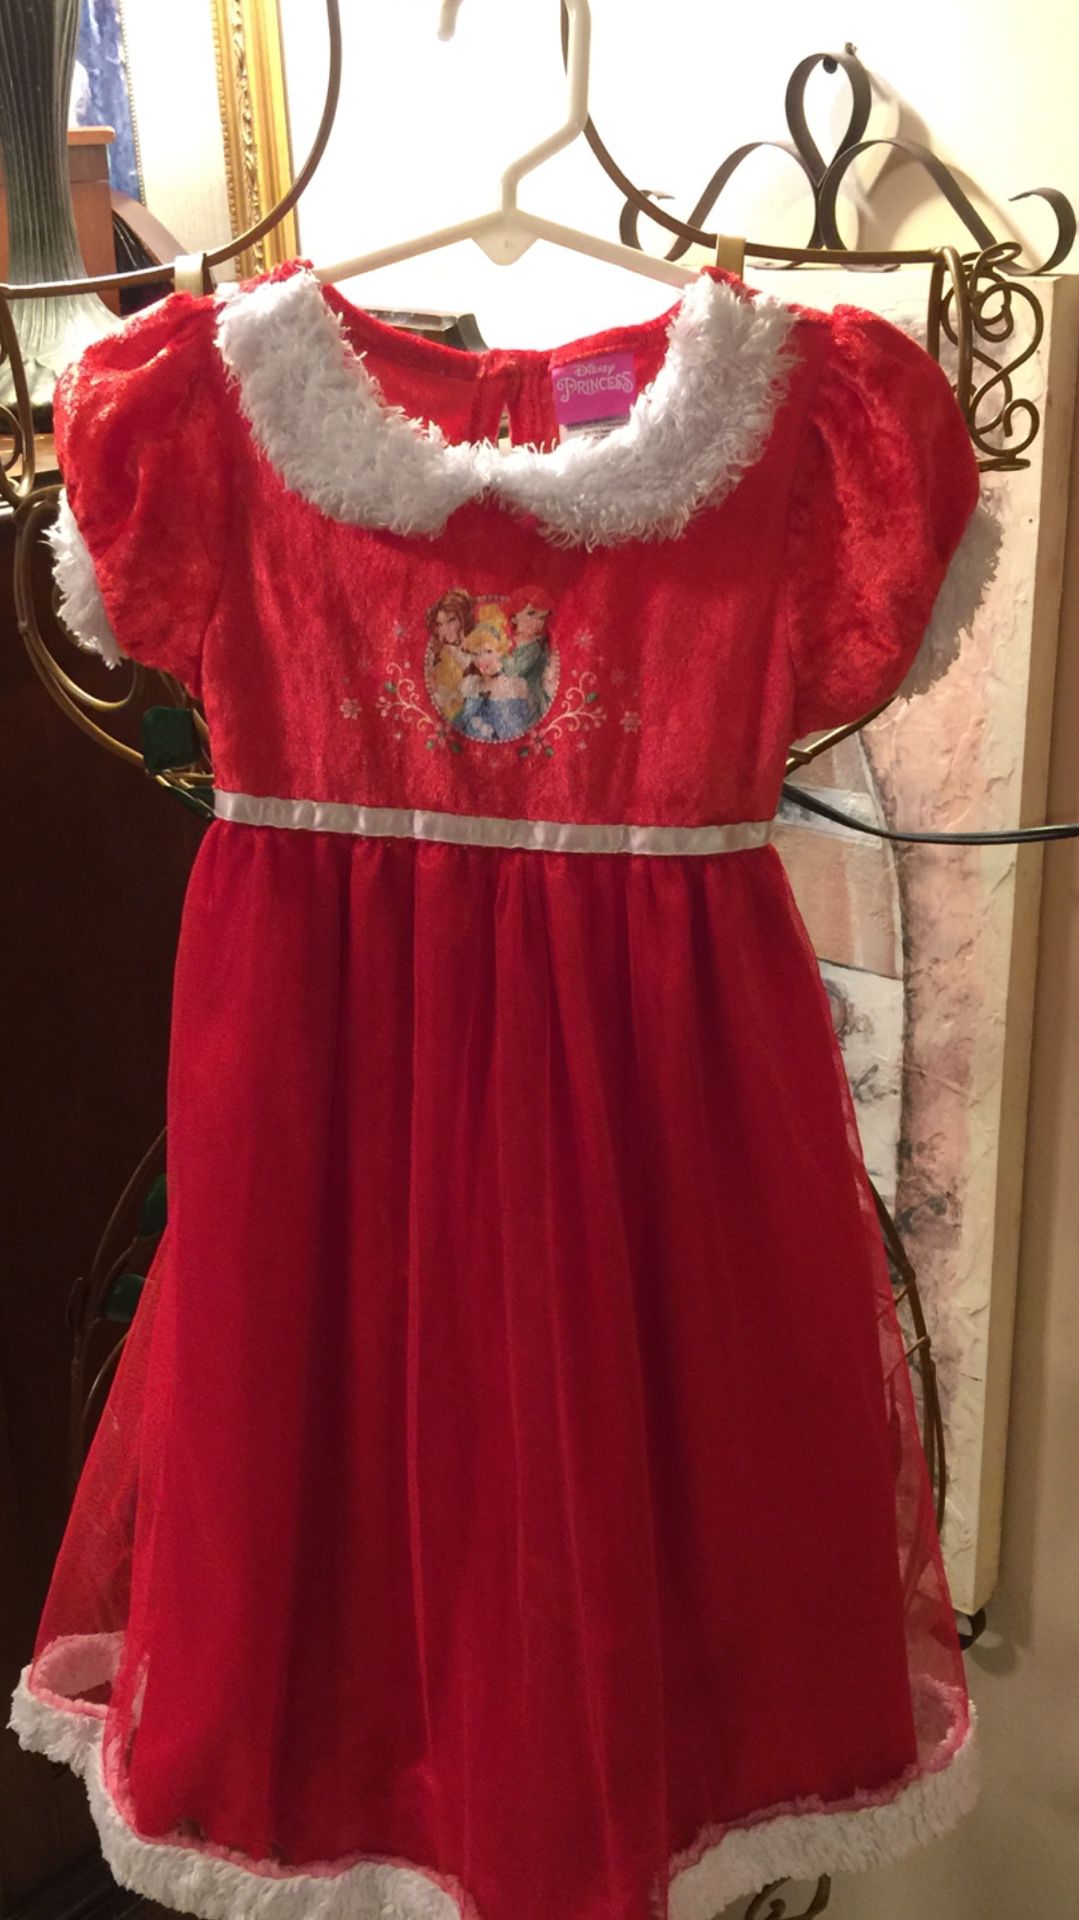 Perfect!! For the Princess crushed red velvet top with fur trim long full bottom silky with sheer soft tulle & sweet pic of belle Cinderella & Ariel